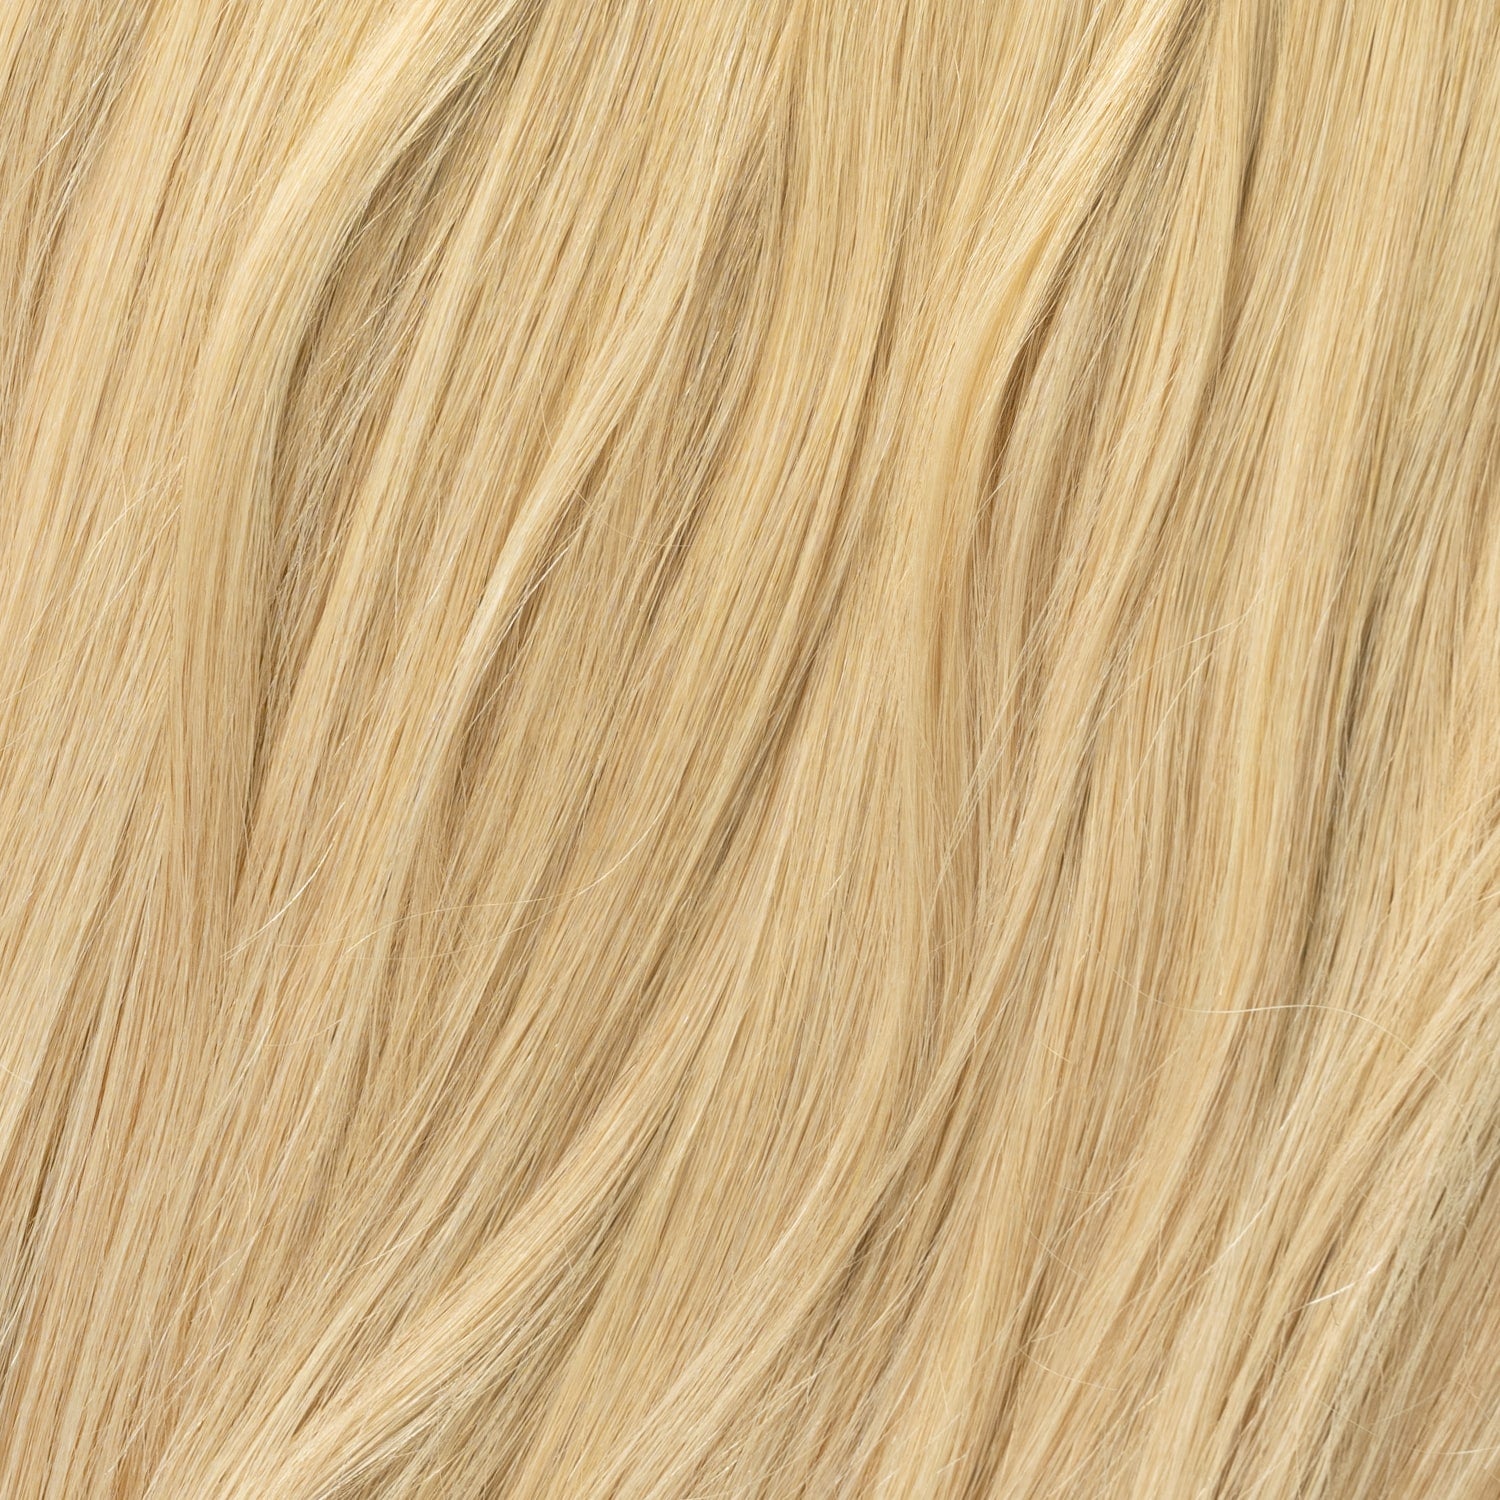 Halo extensions - Honey Blonde 15A